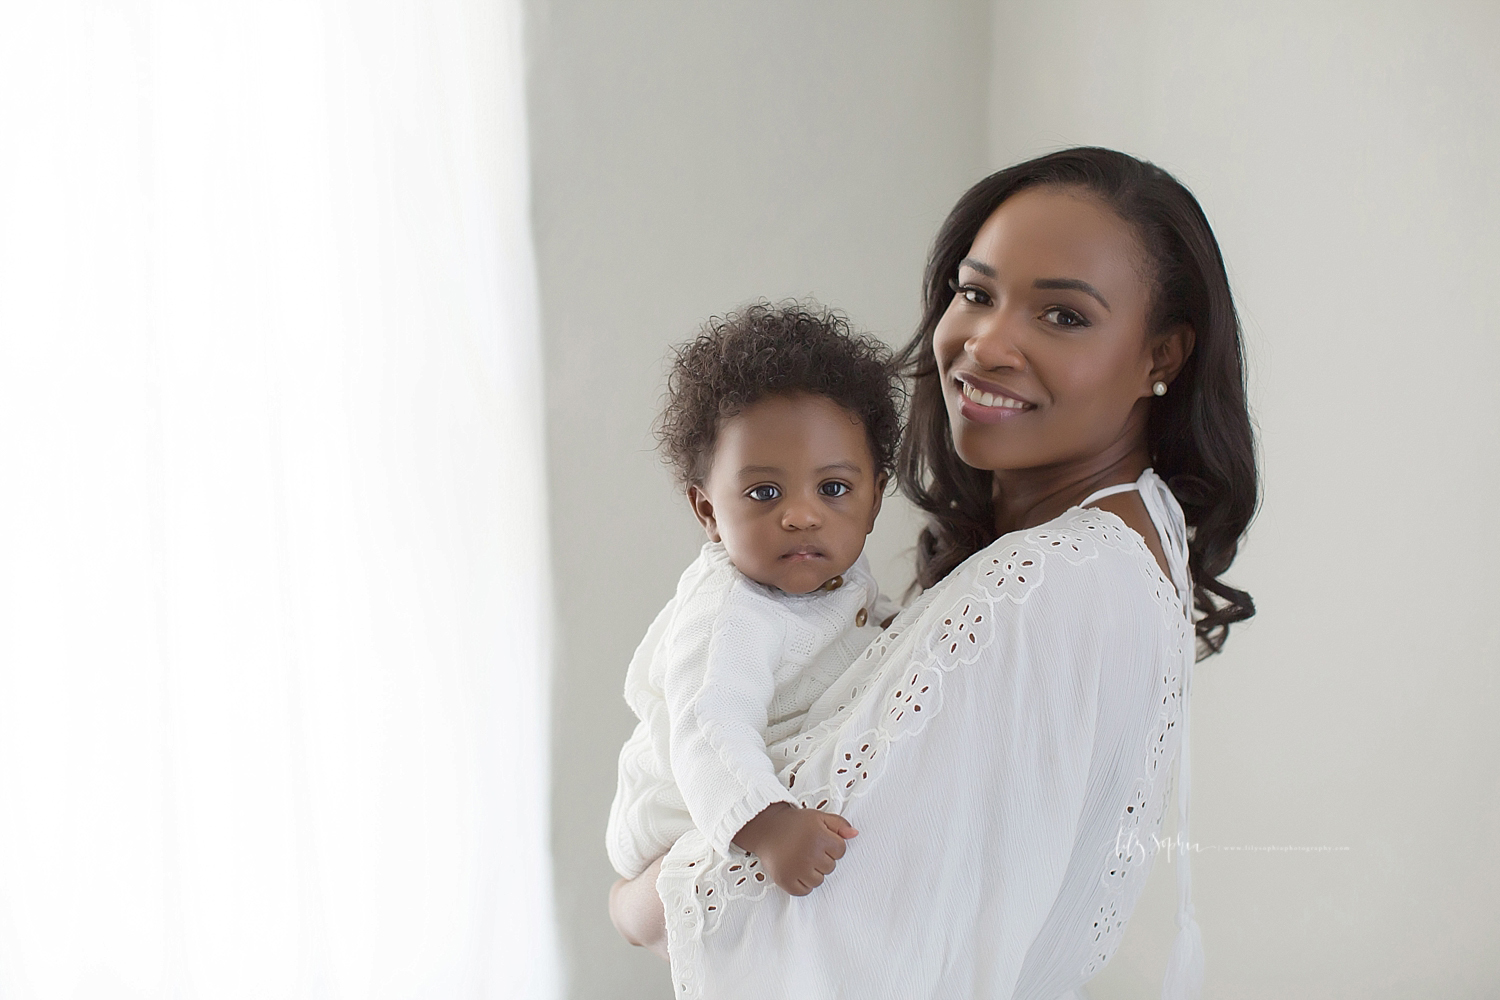  Image of an African American woman, wearing a while lace dress, holding her 6 month old son who is wearing a white romper.  